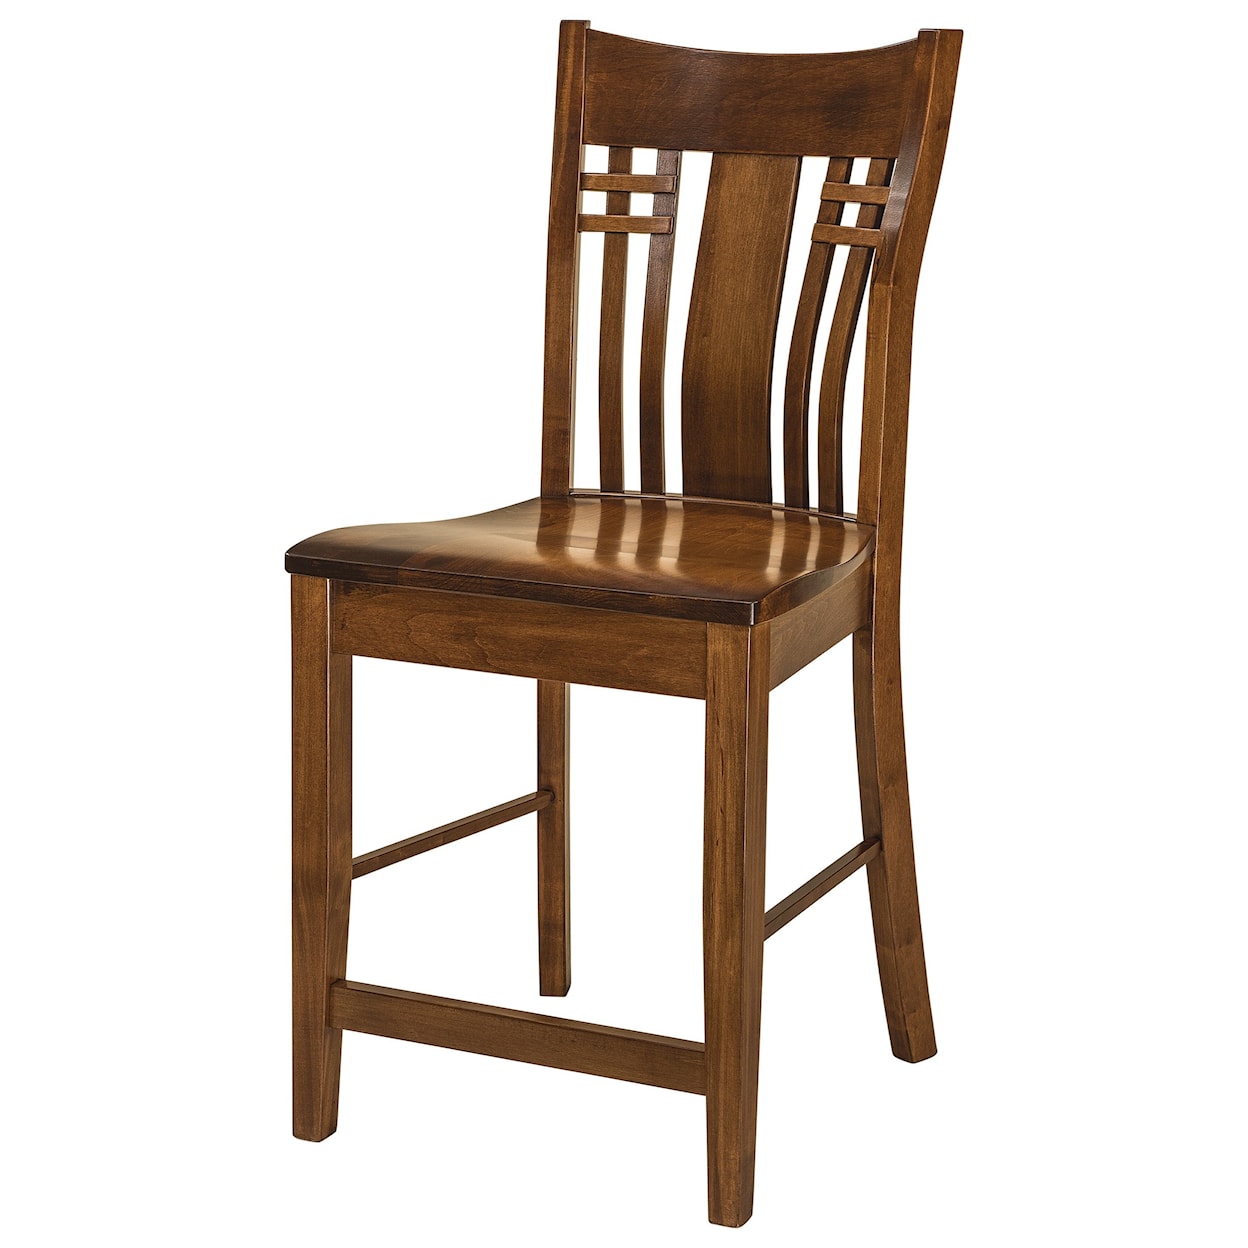 F&N Woodworking Bennet Stationary Bar Stool - Wood Seat